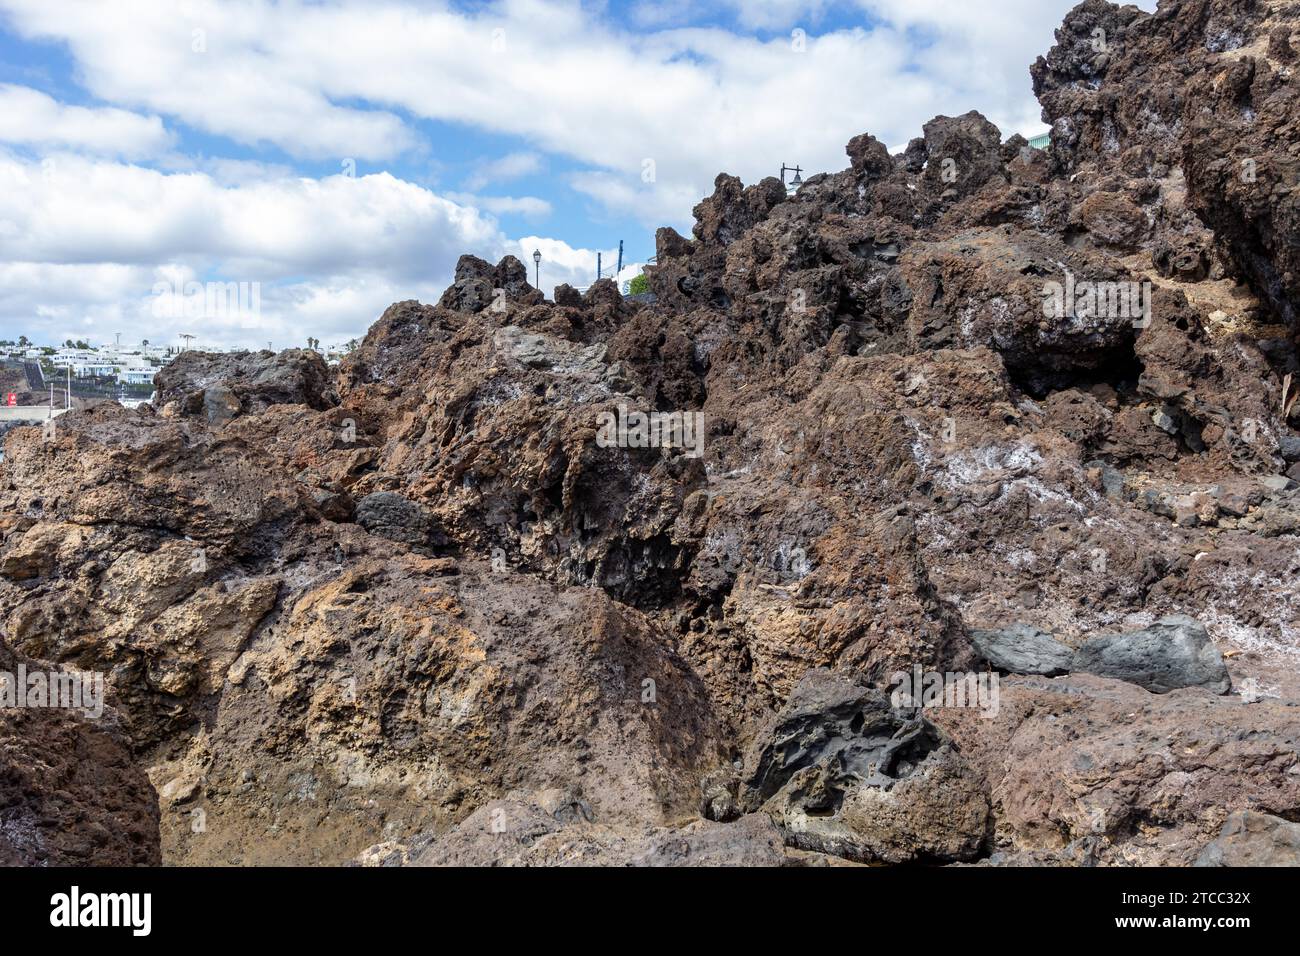 Big lava rocks on the coastline of Puerto del Carmen at Canary island Lanzarote, Spain. The sky is blue with white clouds Stock Photo